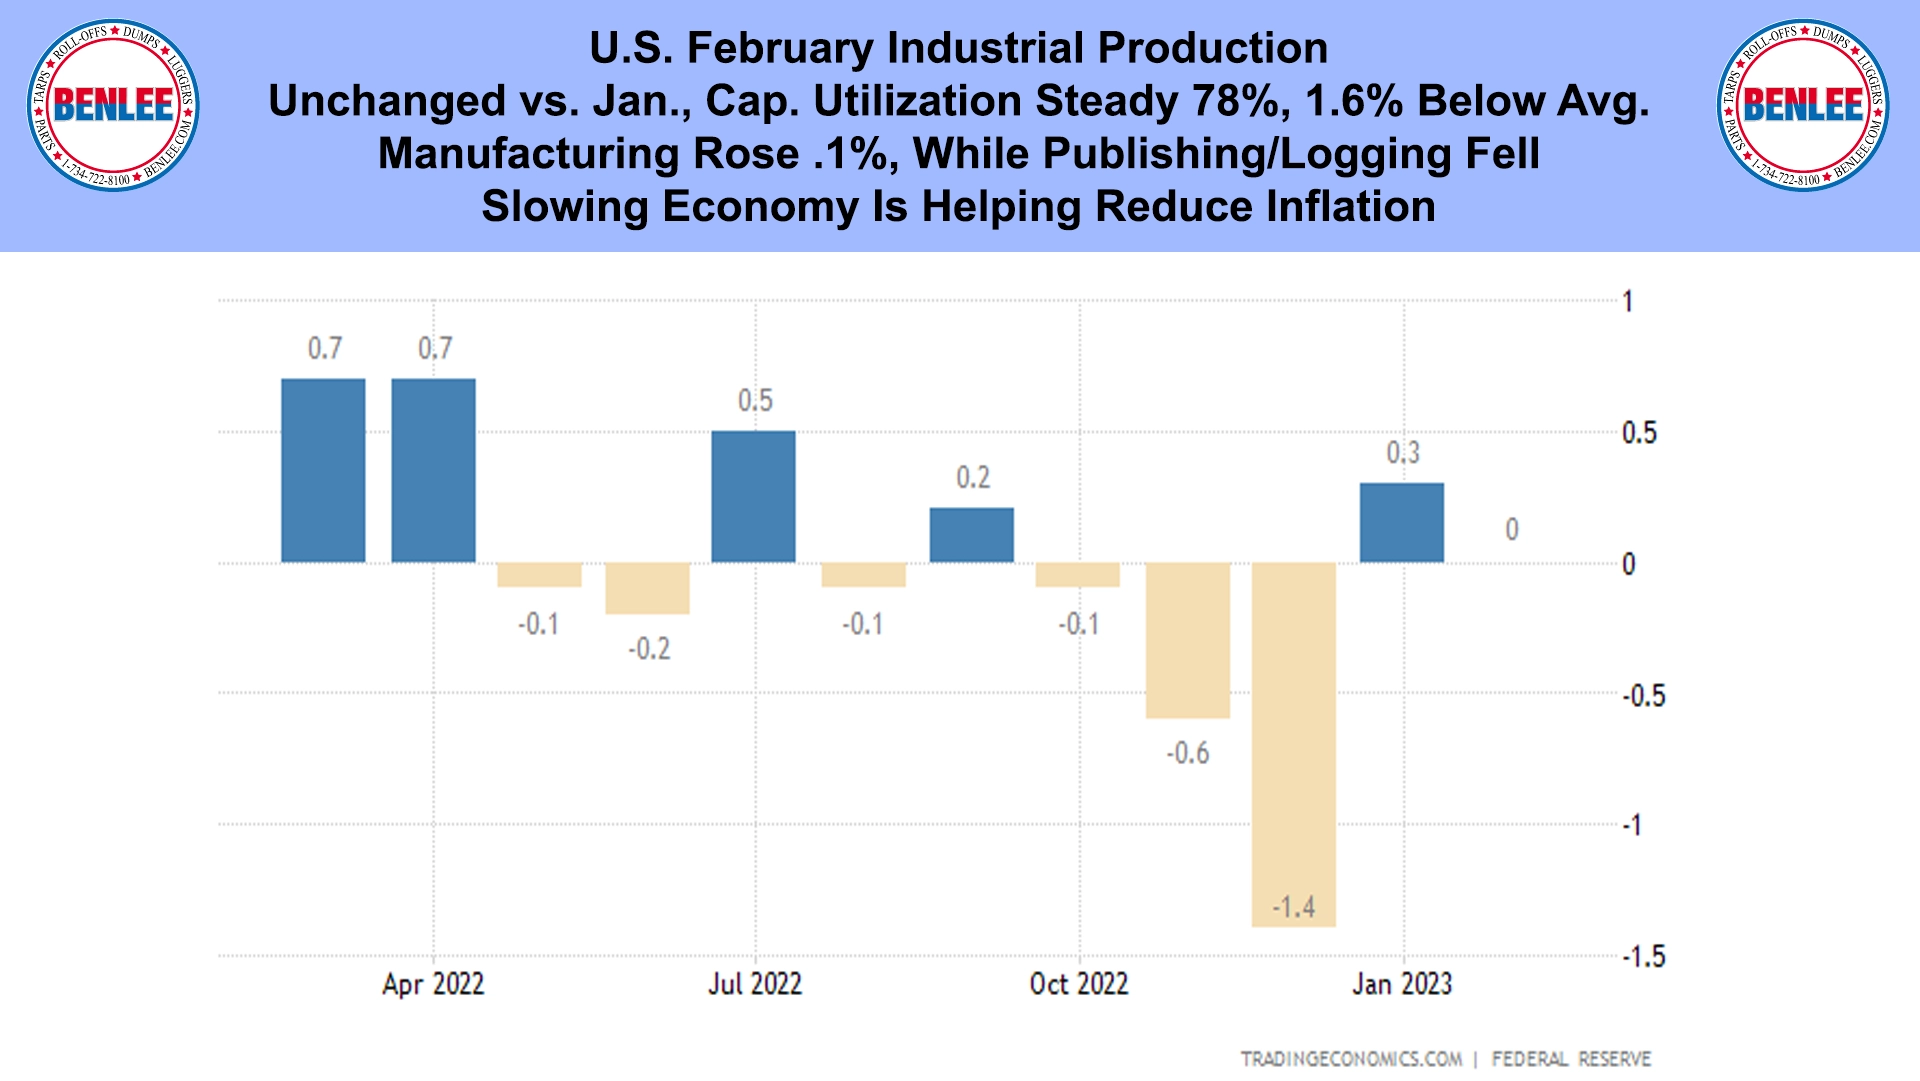 U.S. February Industrial Production